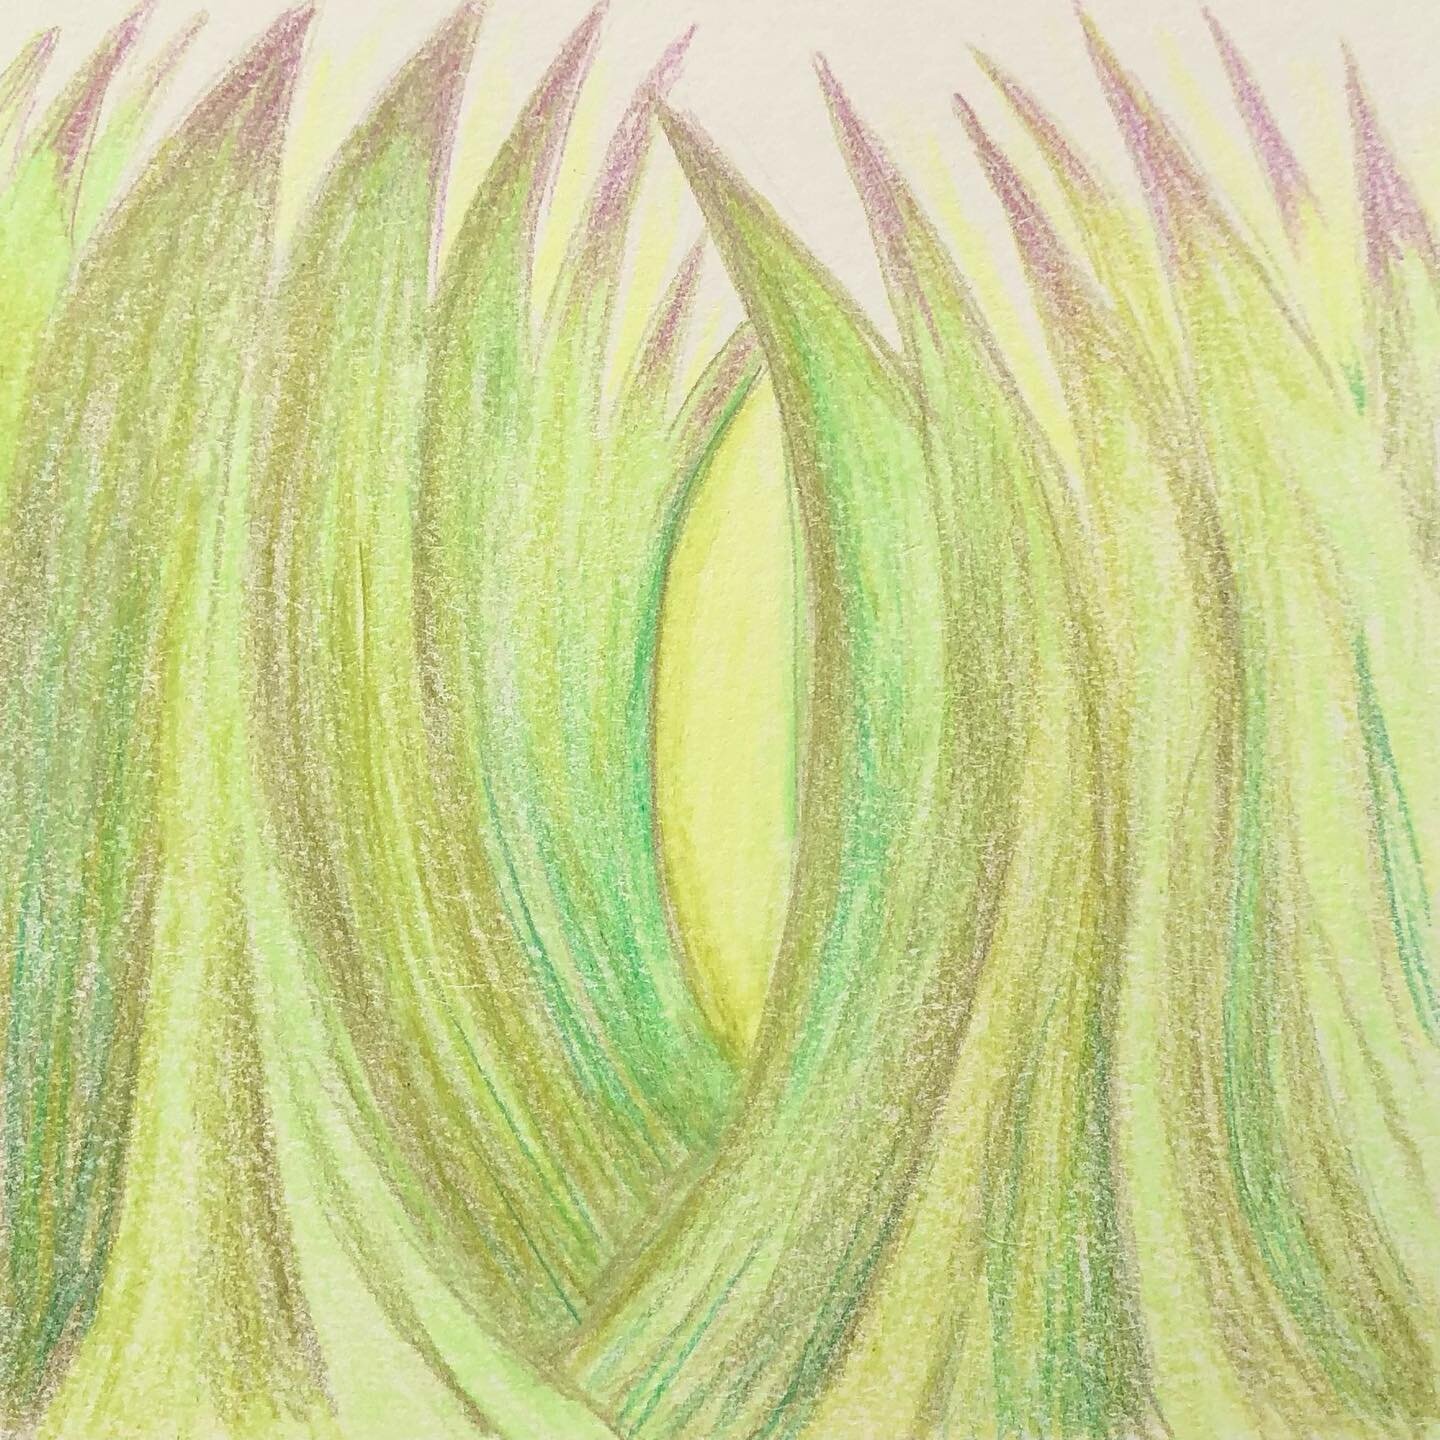 Daily tiny drawing&hellip;walking through tall cheat grass feeling like a small critter&hellip;all the rain has made the plants giants

#dailydrawing #coloredpencil #cheatgrass #abstractnature #dailynaturedrawing #drawinginnature